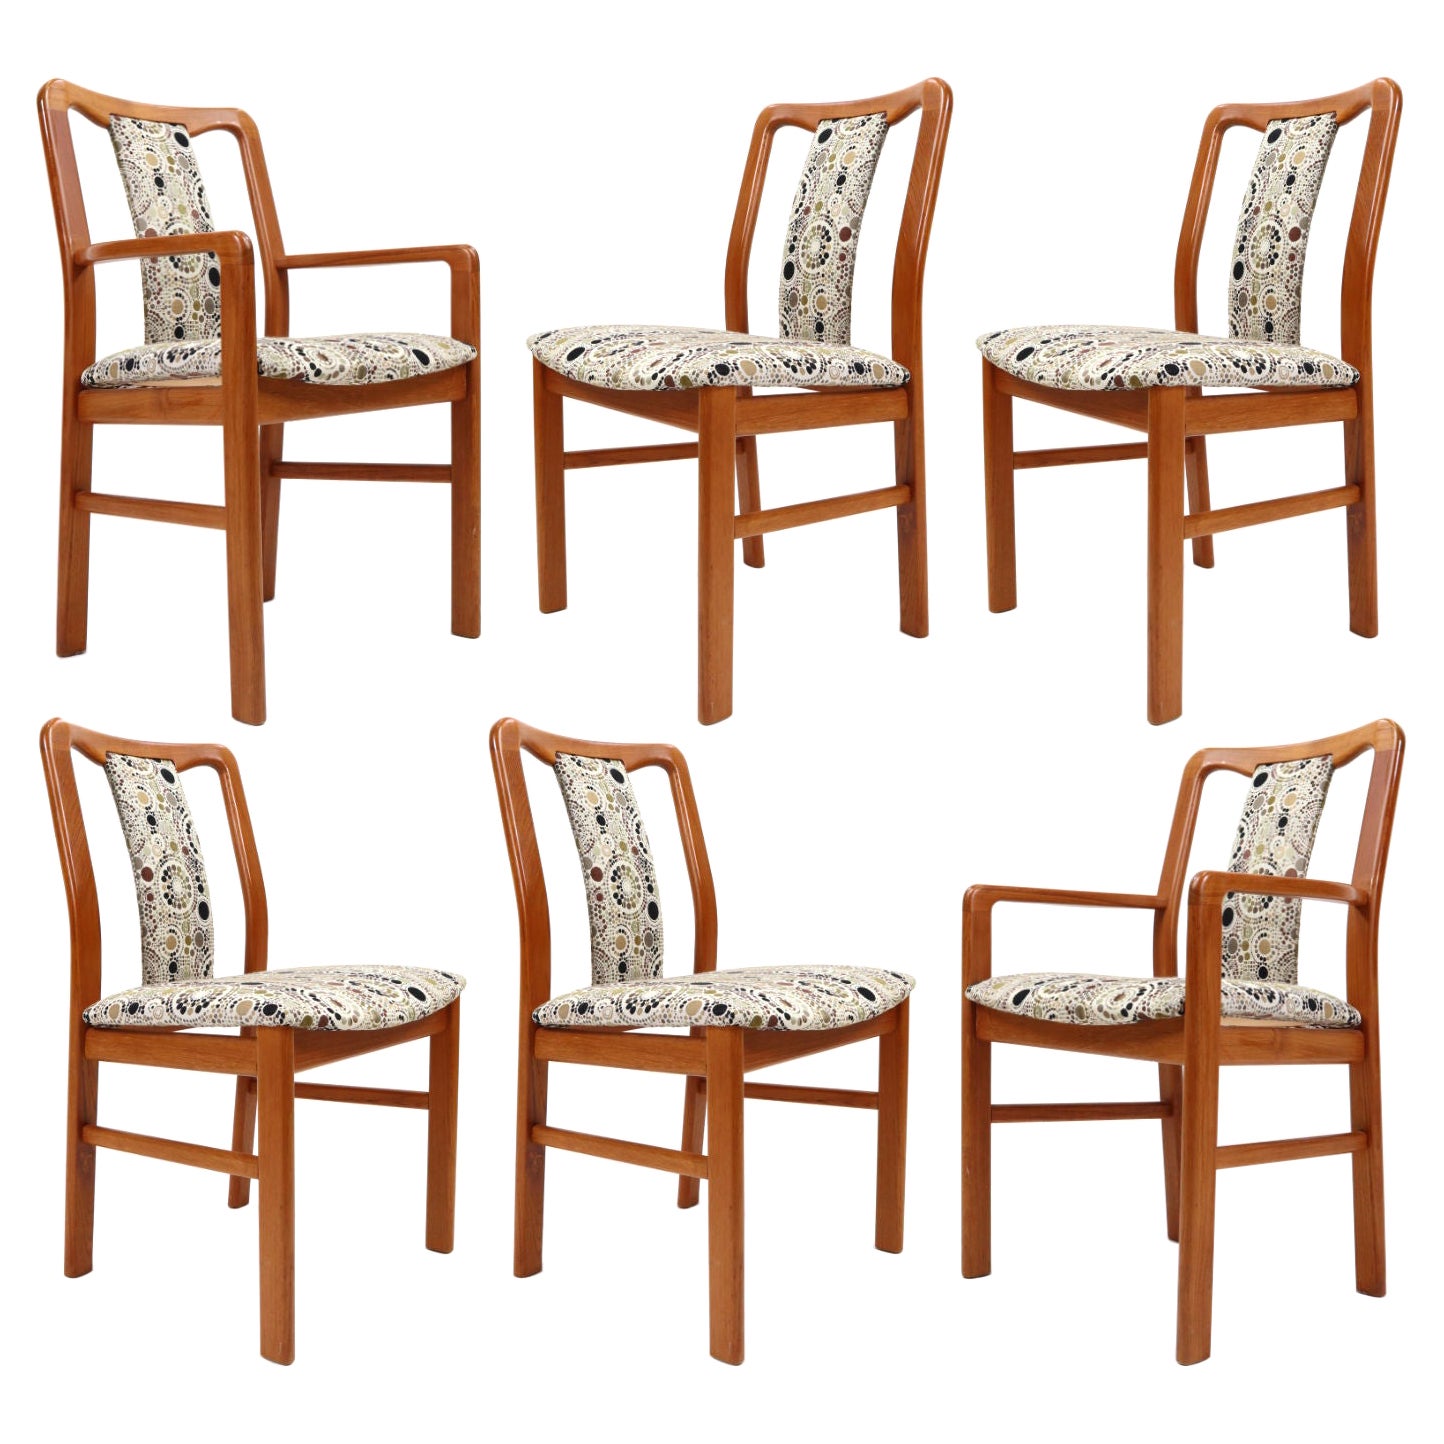 Set of Six Danish Teak Upholstered Dining Chairs by Boltinge